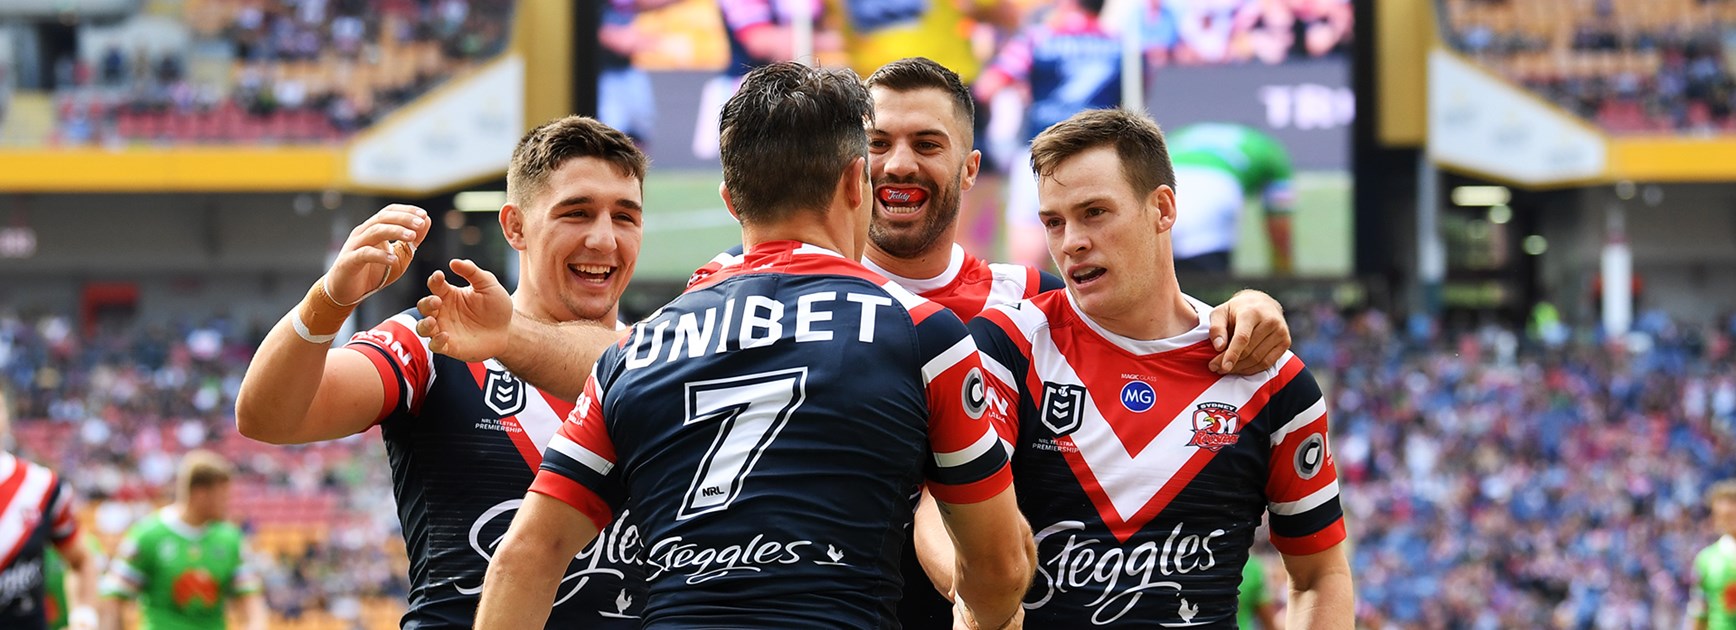 NRL Telstra Premiership 2019 grand final sold out